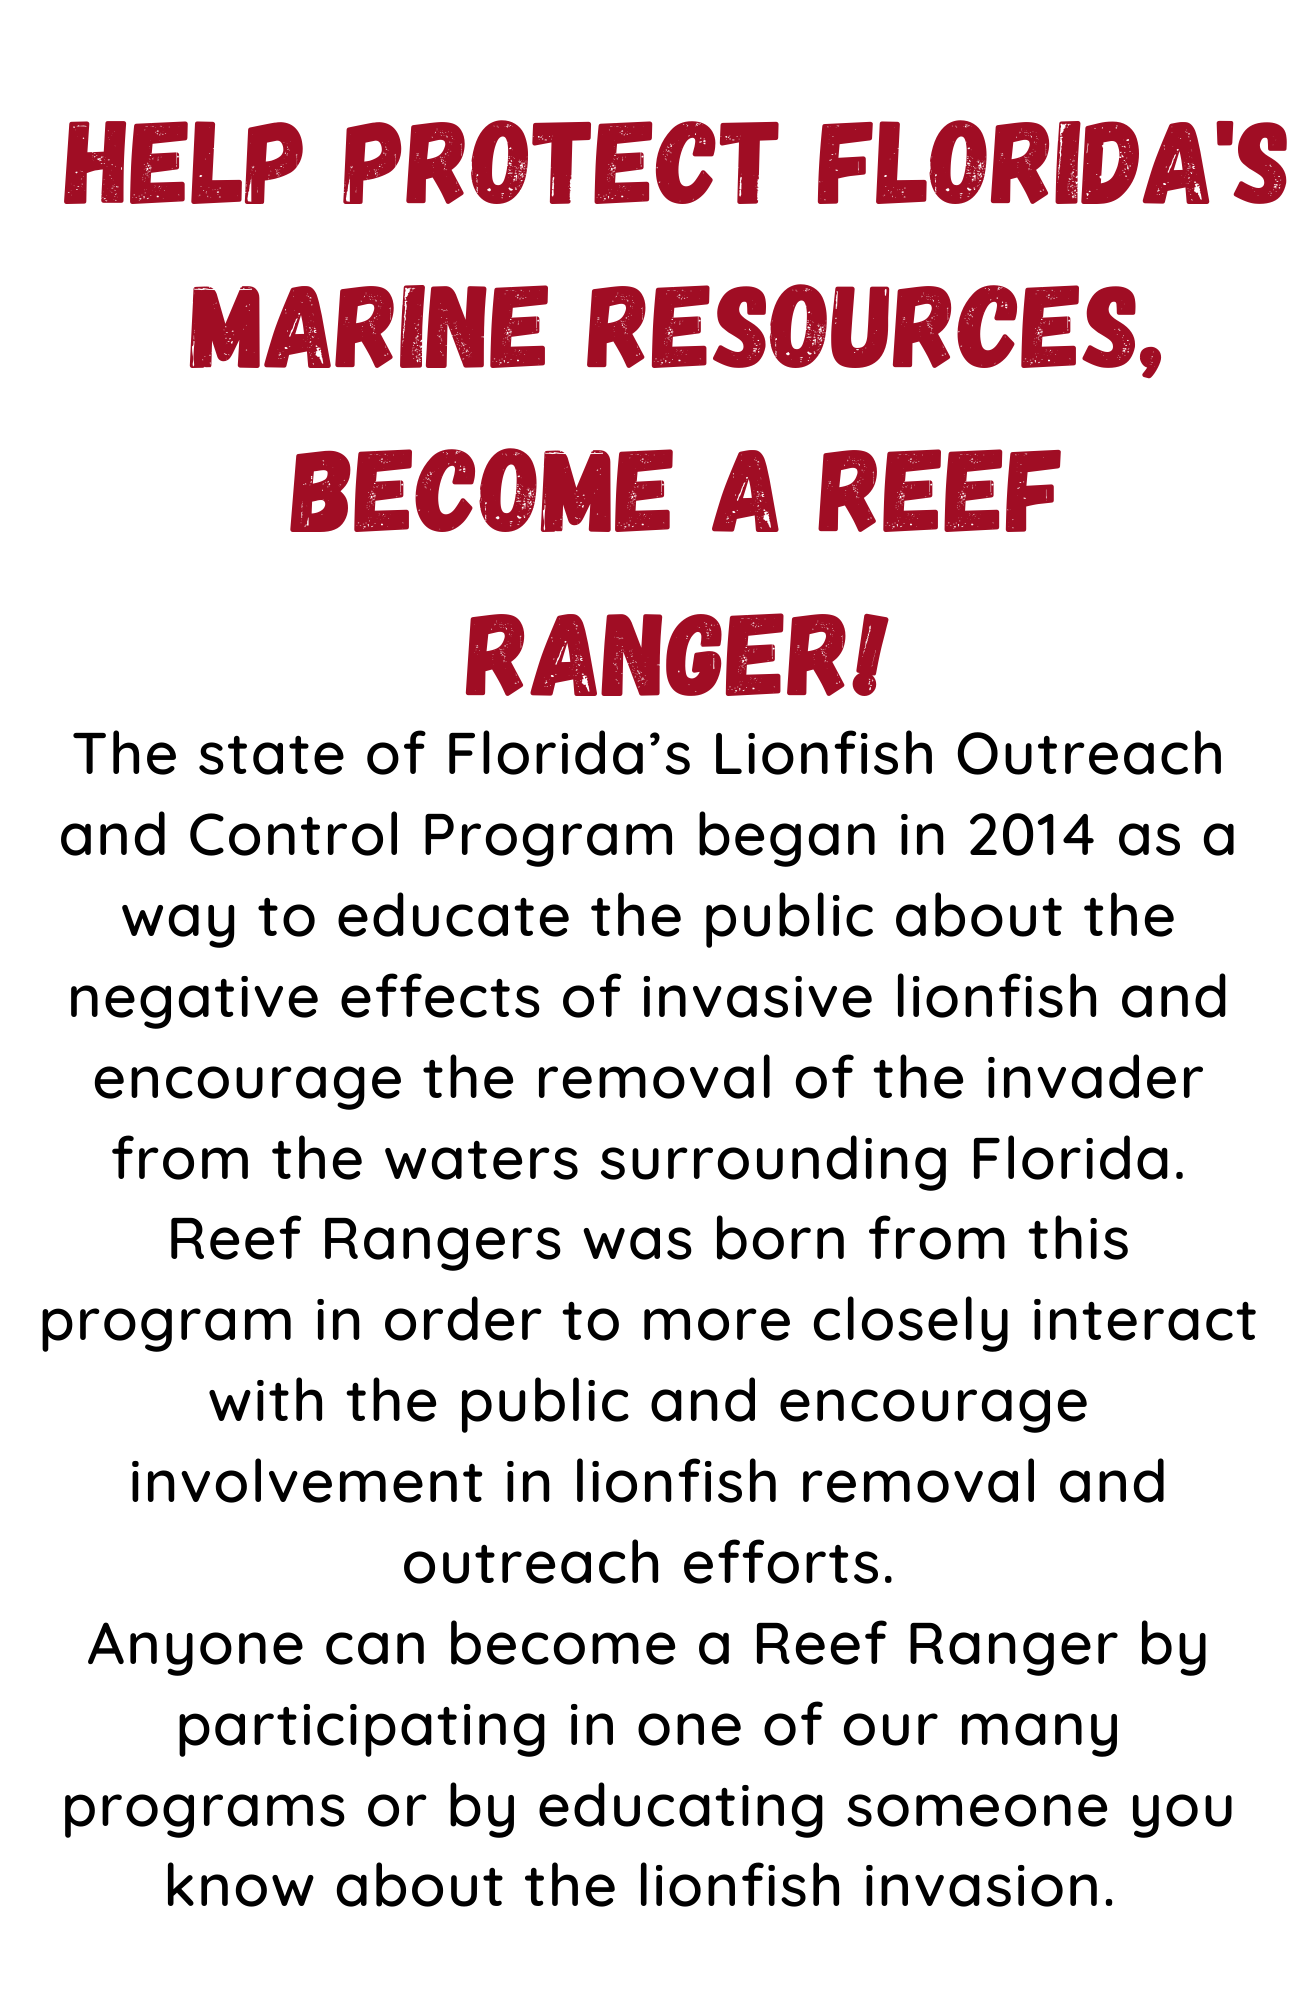 Help Protect Florida's Marine Resources, Become a Reef Ranger! The state of Florida’s Lionfish Outreach and Control Program began in 2014 as a way to educate the public about the negative effects of invasive lionfish and encourage the removal of the invader from the waters surrounding Florida. Reef Rangers was born from this program in order to more closely interact with the public and encourage involvement in lionfish removal and outreach efforts. Anyone can become a Reef Ranger by participating in one of our many programs or by educating someone you know about the lionfish invasion.